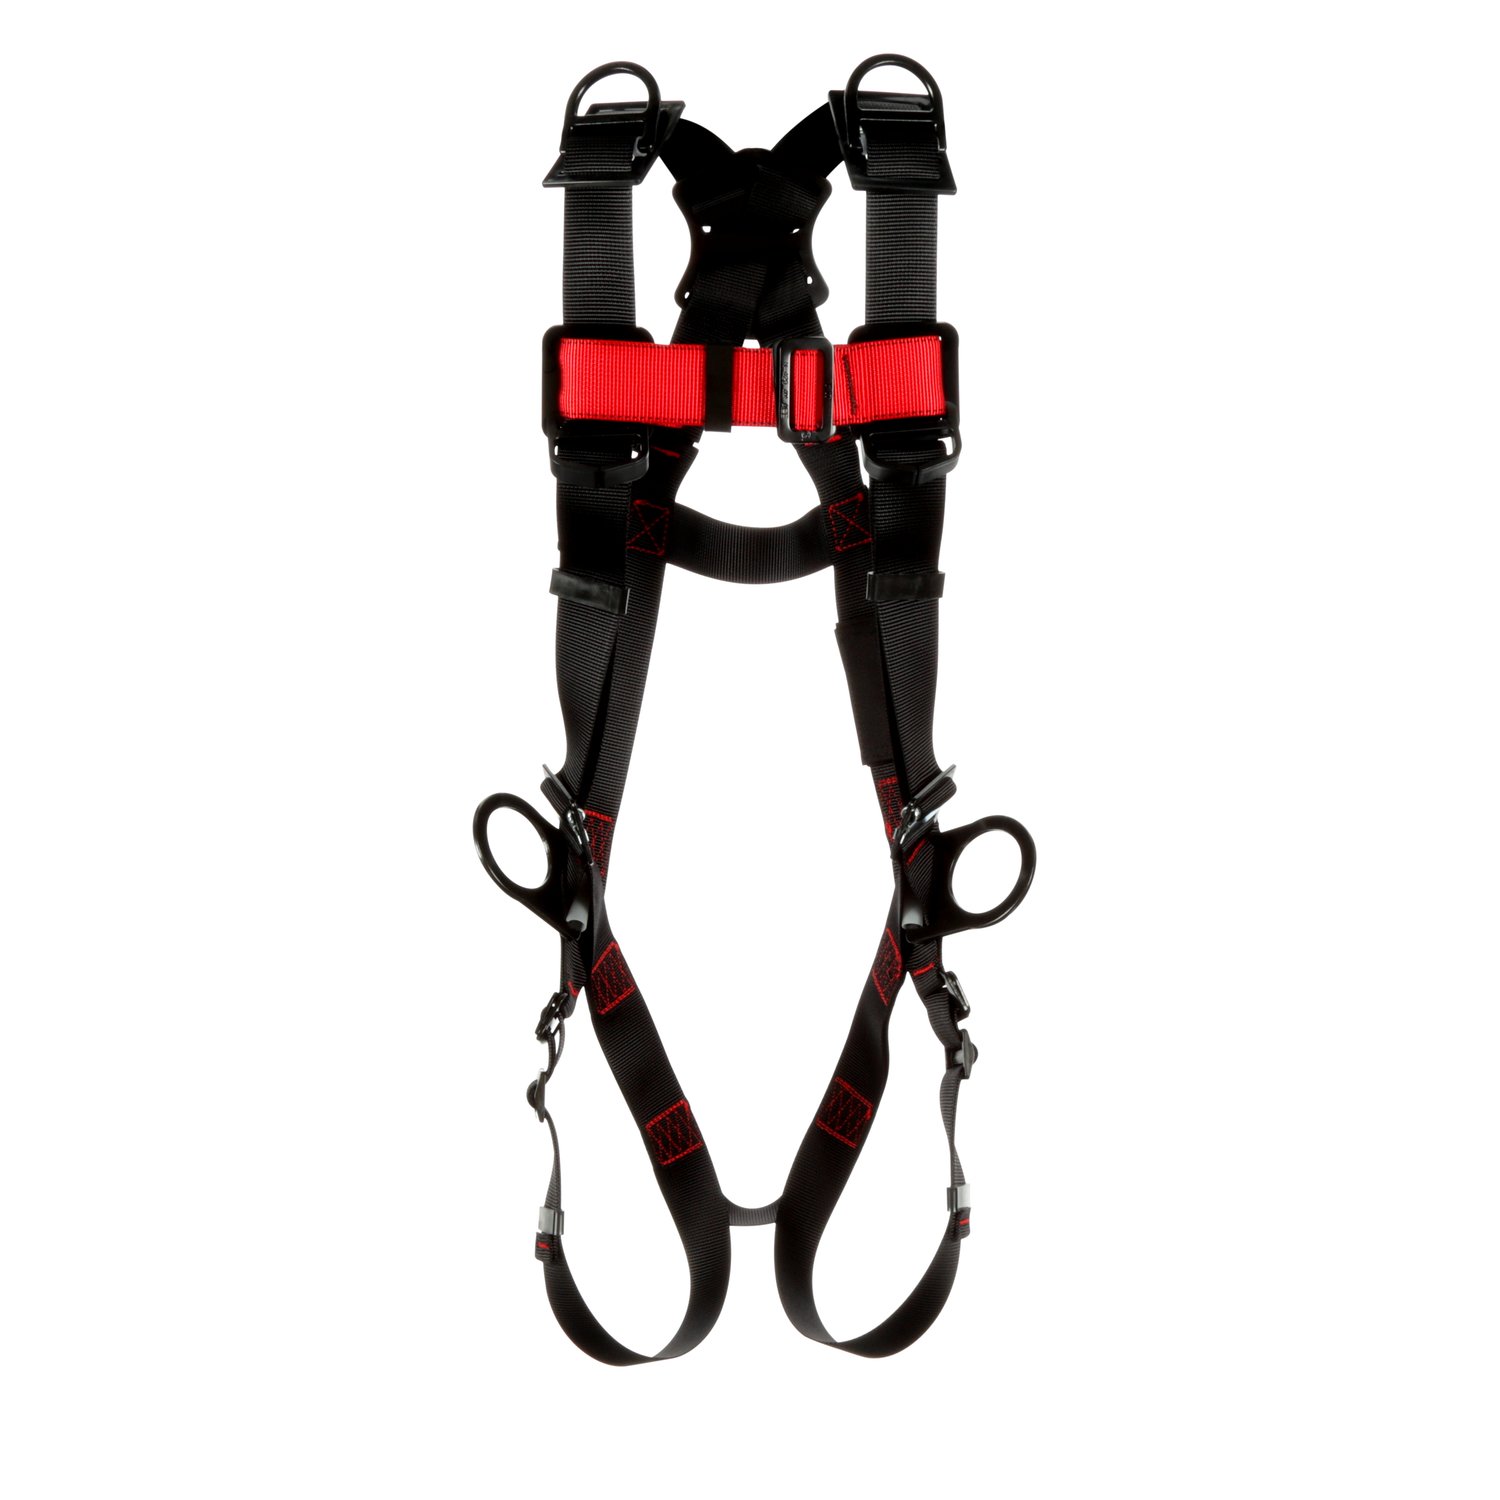 7012816844 - 3M Protecta P200 Vest Positioning/Retrieval Safety Harness 1161565, X-Large